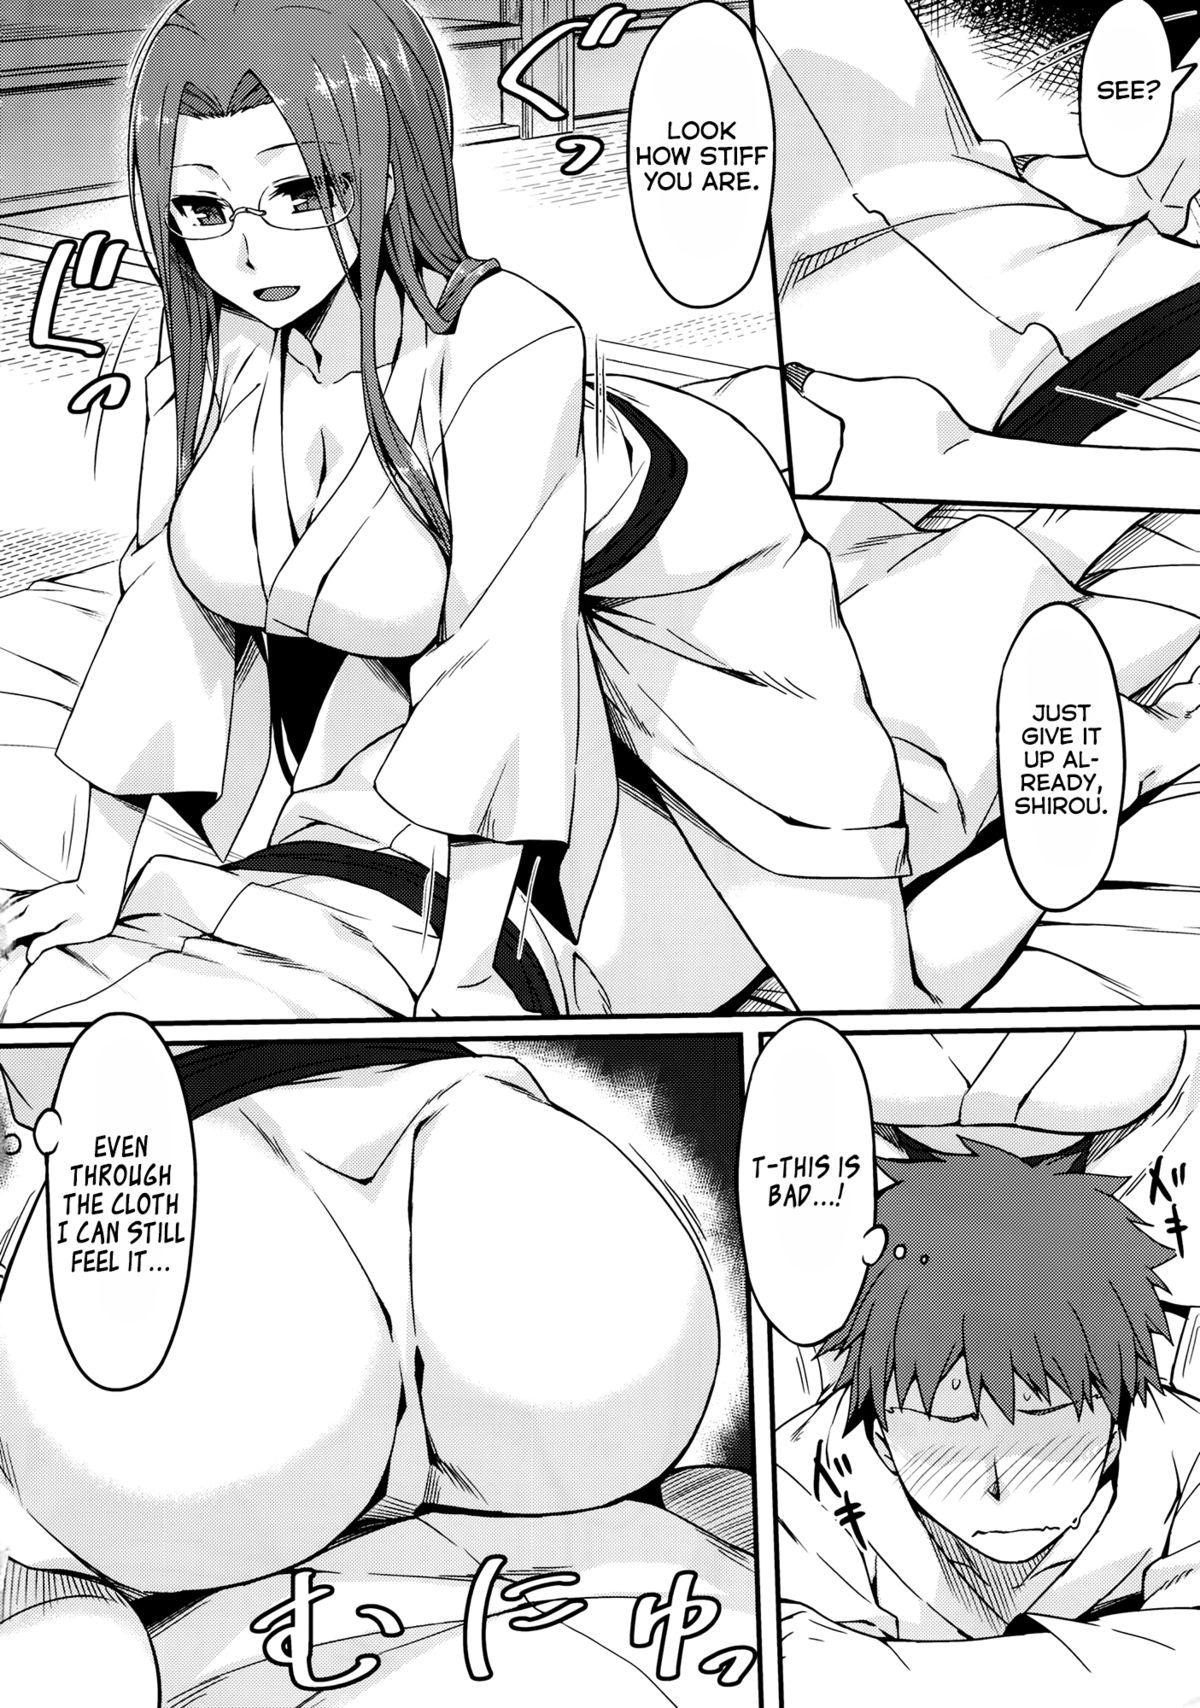 Ex Girlfriend (C88) [S.S.L (Yanagi)] Rider-san to Onsen Yado. Sonogo | Hot Spring Inn With Rider-san. After Story (Fate/stay night) [English] [Facedesk] - Fate stay night Nigeria - Page 4